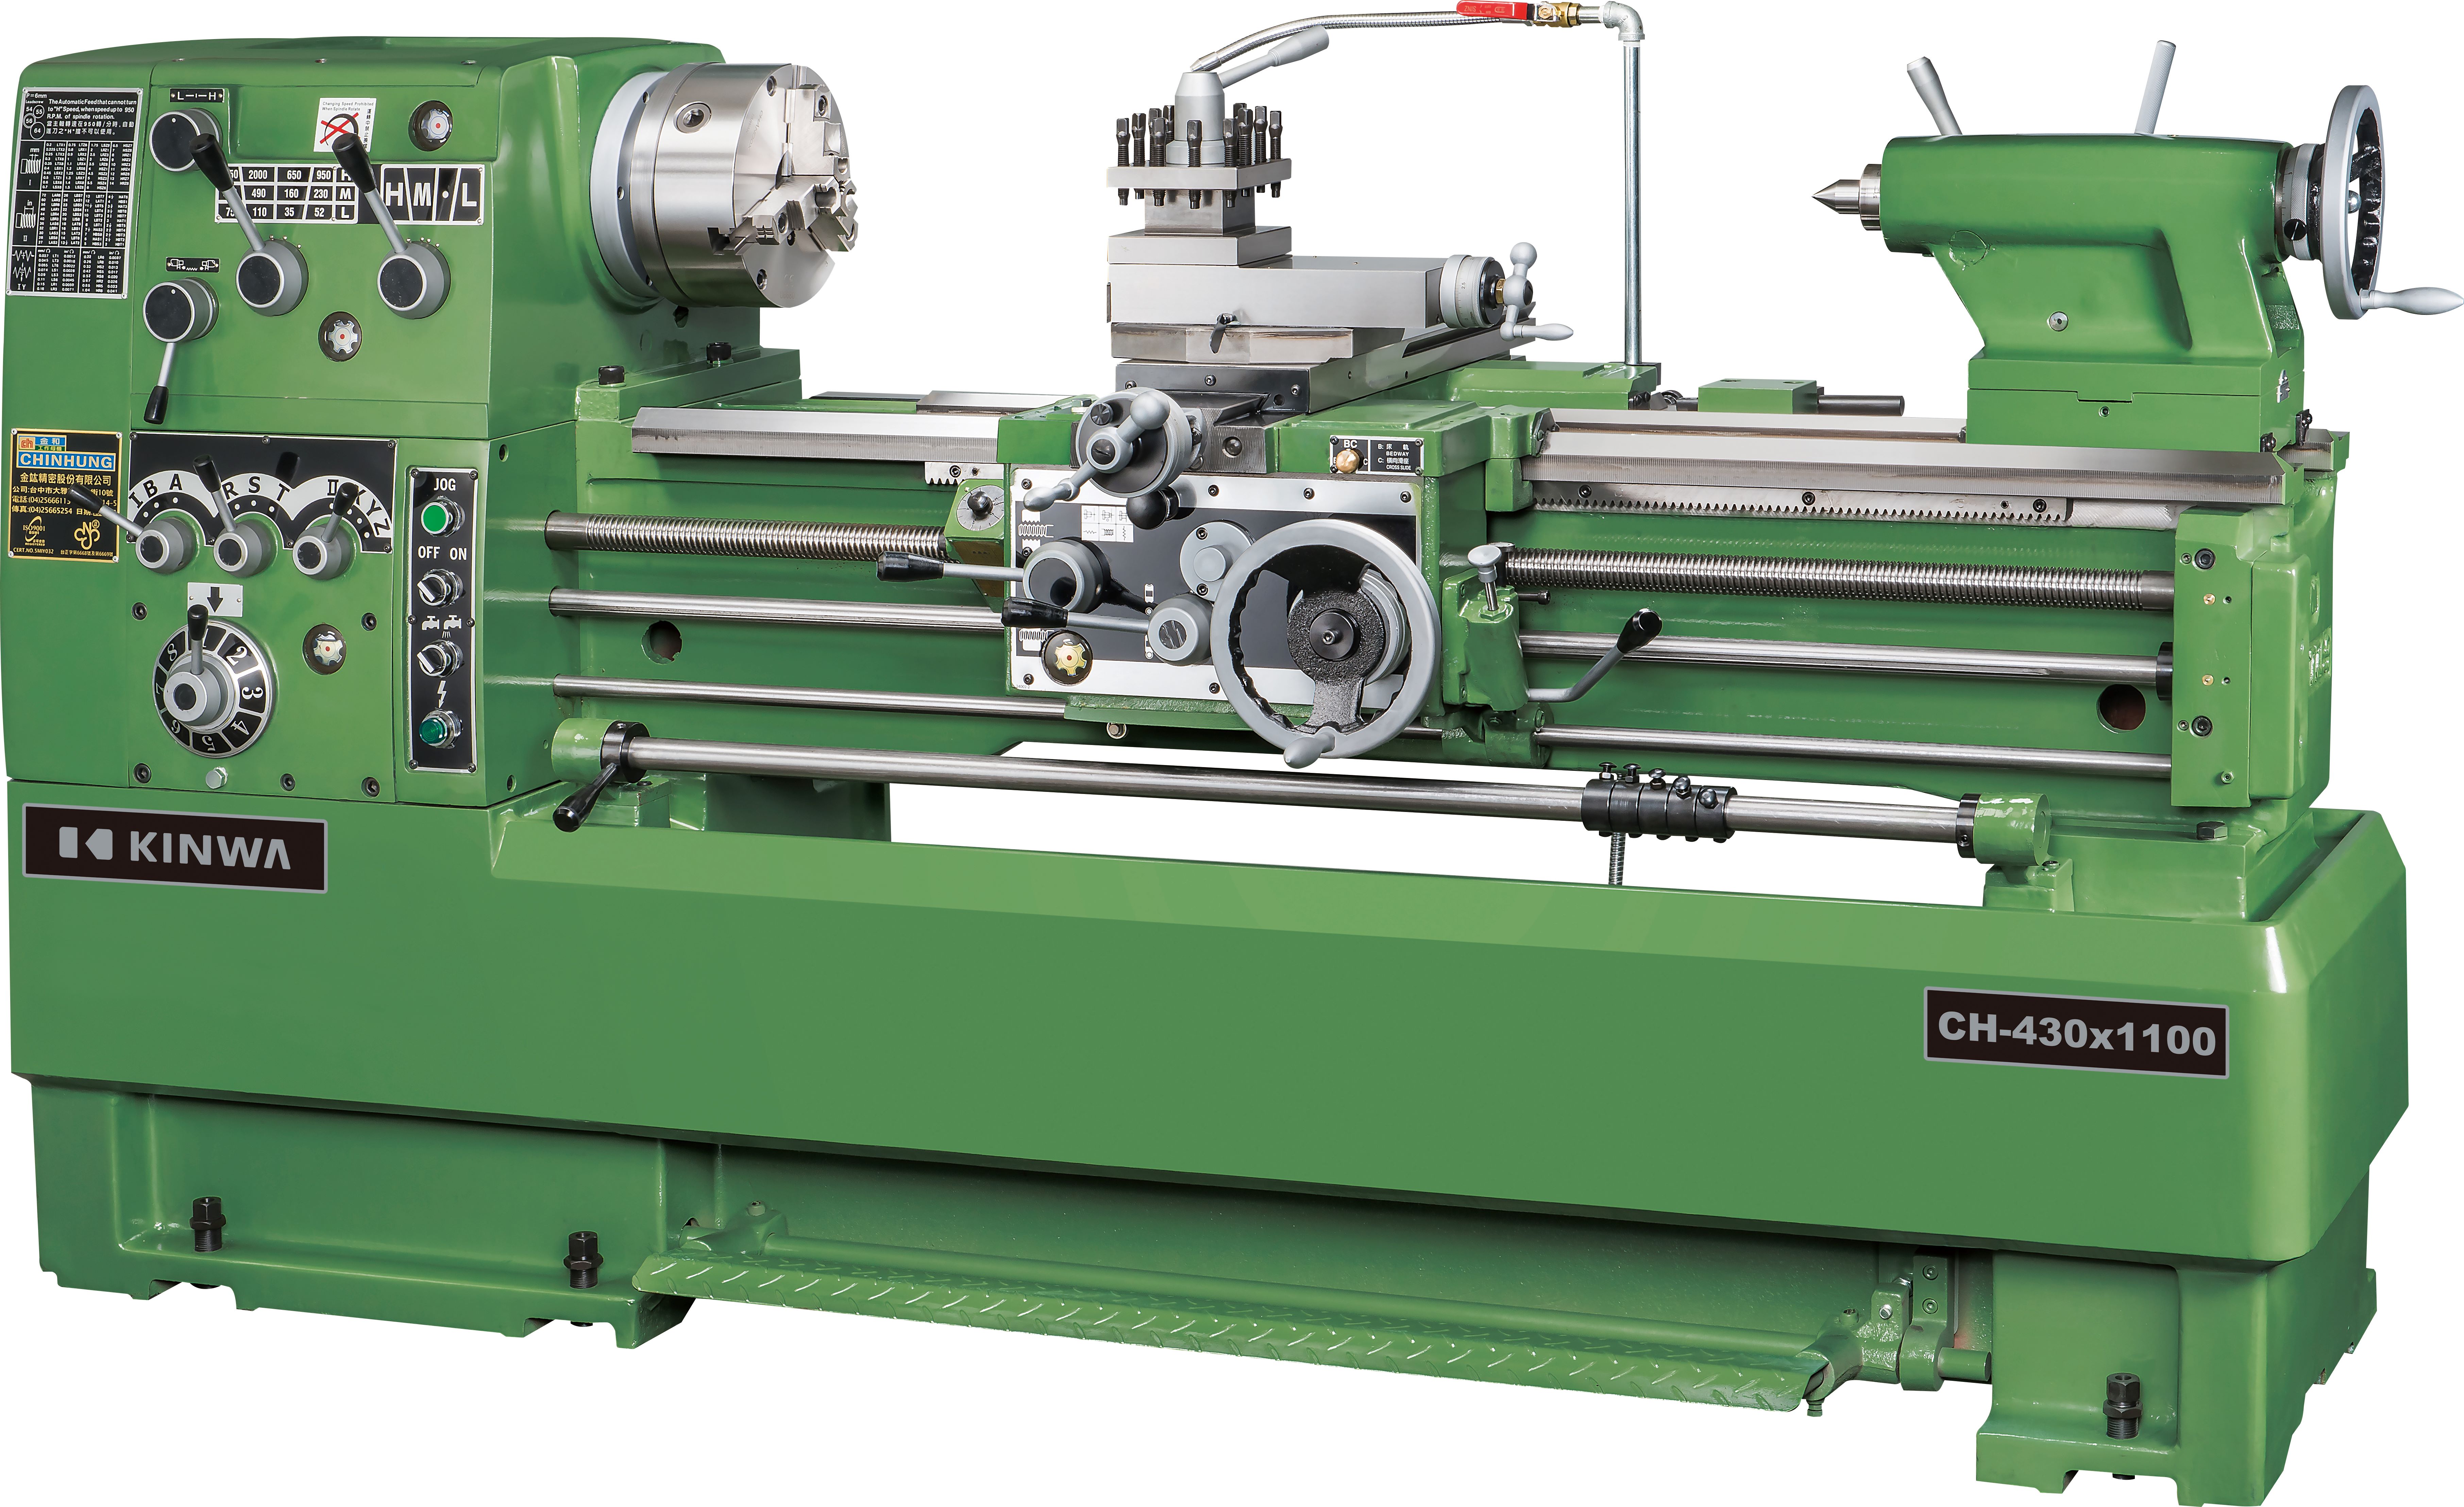 News|Heritage Craftsmanship and Technological Charm: The Outstanding Role of Traditional Lathes in Modern Manufacturing